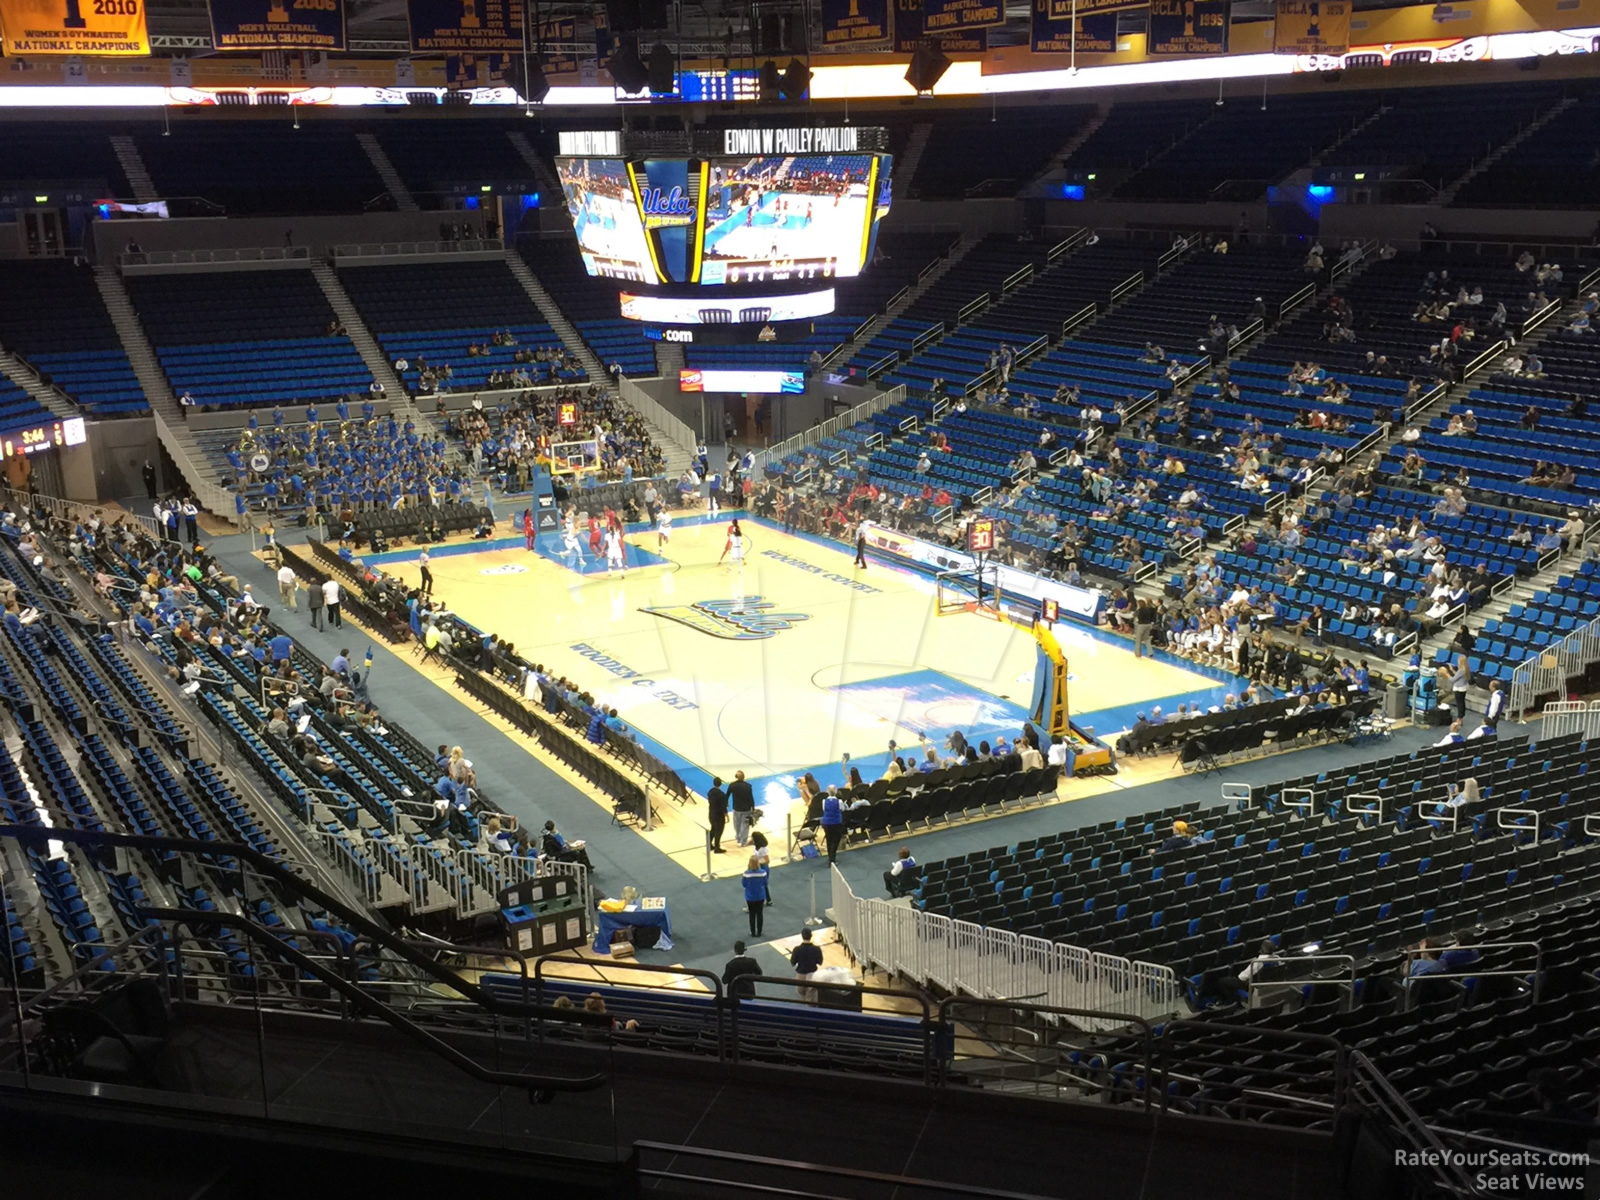 section 211a, row 6 seat view  - pauley pavilion